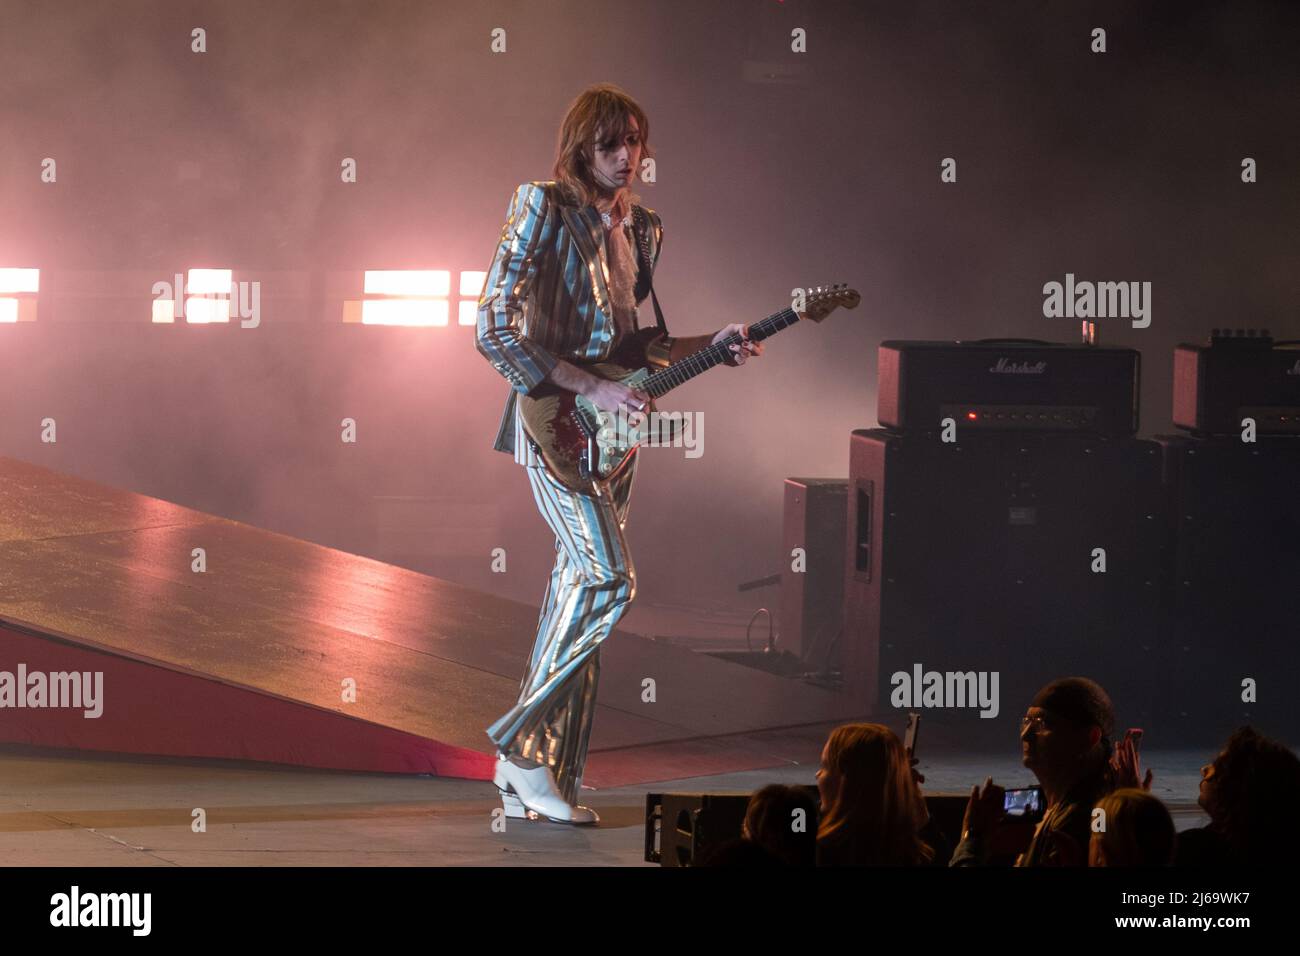 Verona, Italy. 28 April, 2022. Picture shows Maneskin band during the performs at Arena di Verona Credit: Roberto Tommasini/Alamy Live News Stock Photo